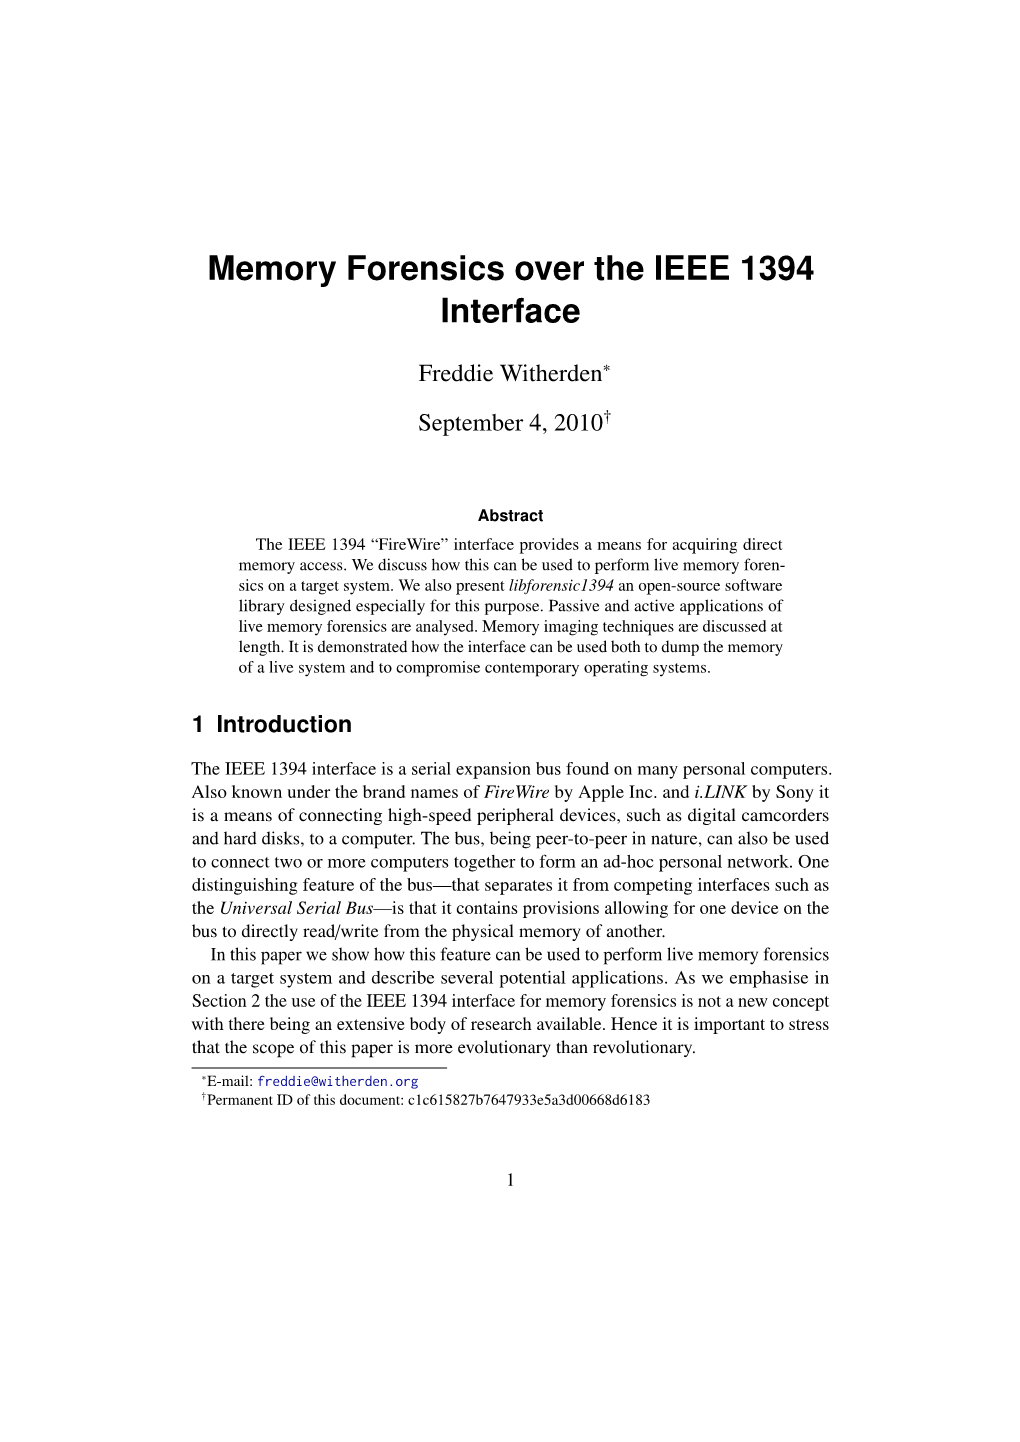 Memory Forensics Over the IEEE 1394 Interface